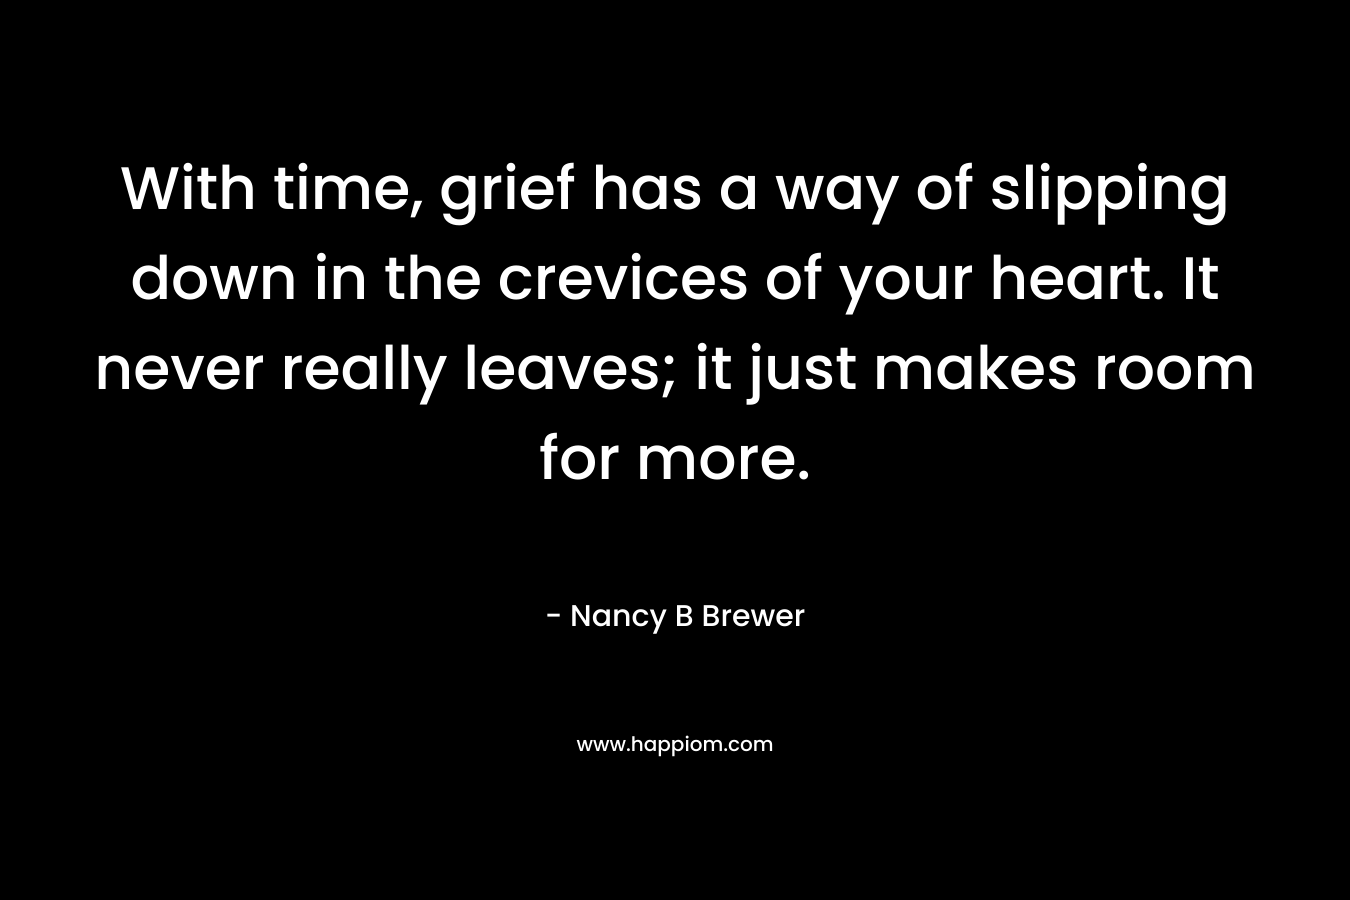 With time, grief has a way of slipping down in the crevices of your heart. It never really leaves; it just makes room for more. – Nancy B Brewer